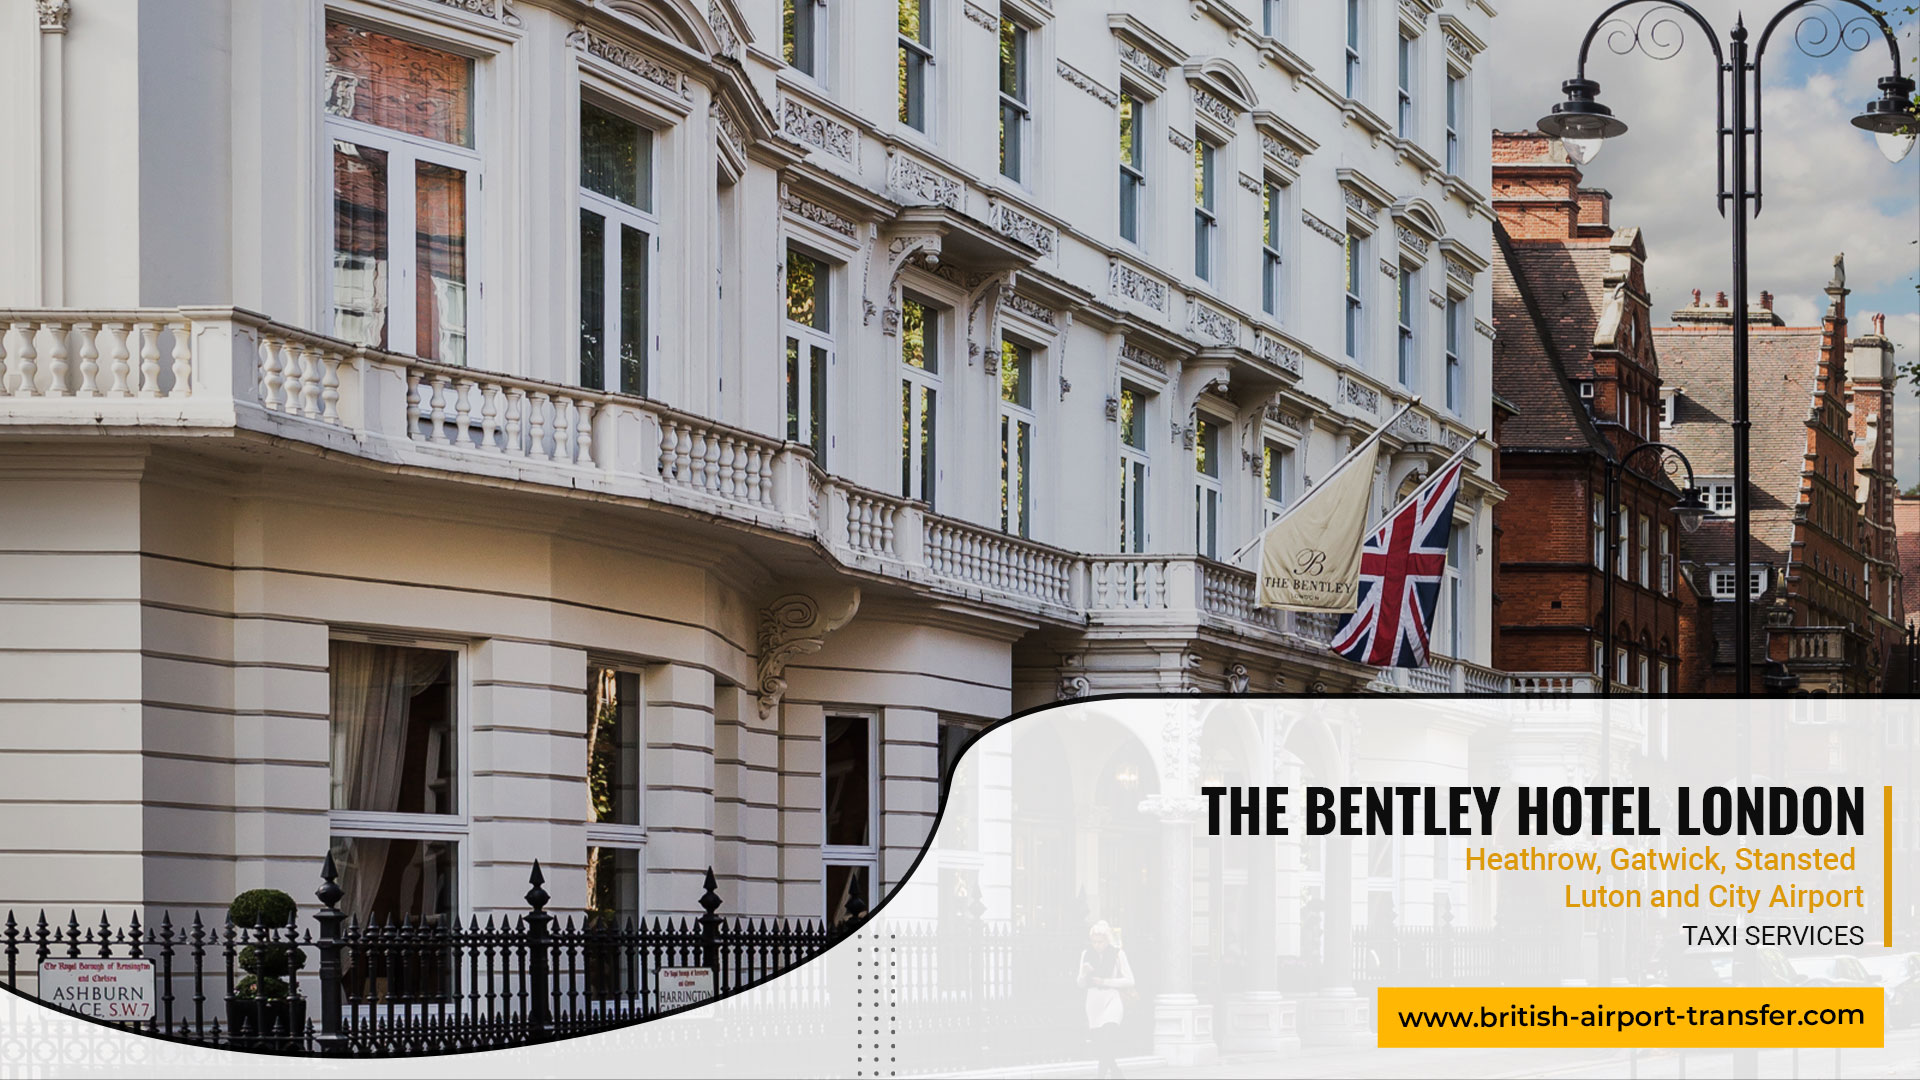 Taxi Service – The Bentley Hotel London / SW7 4JX